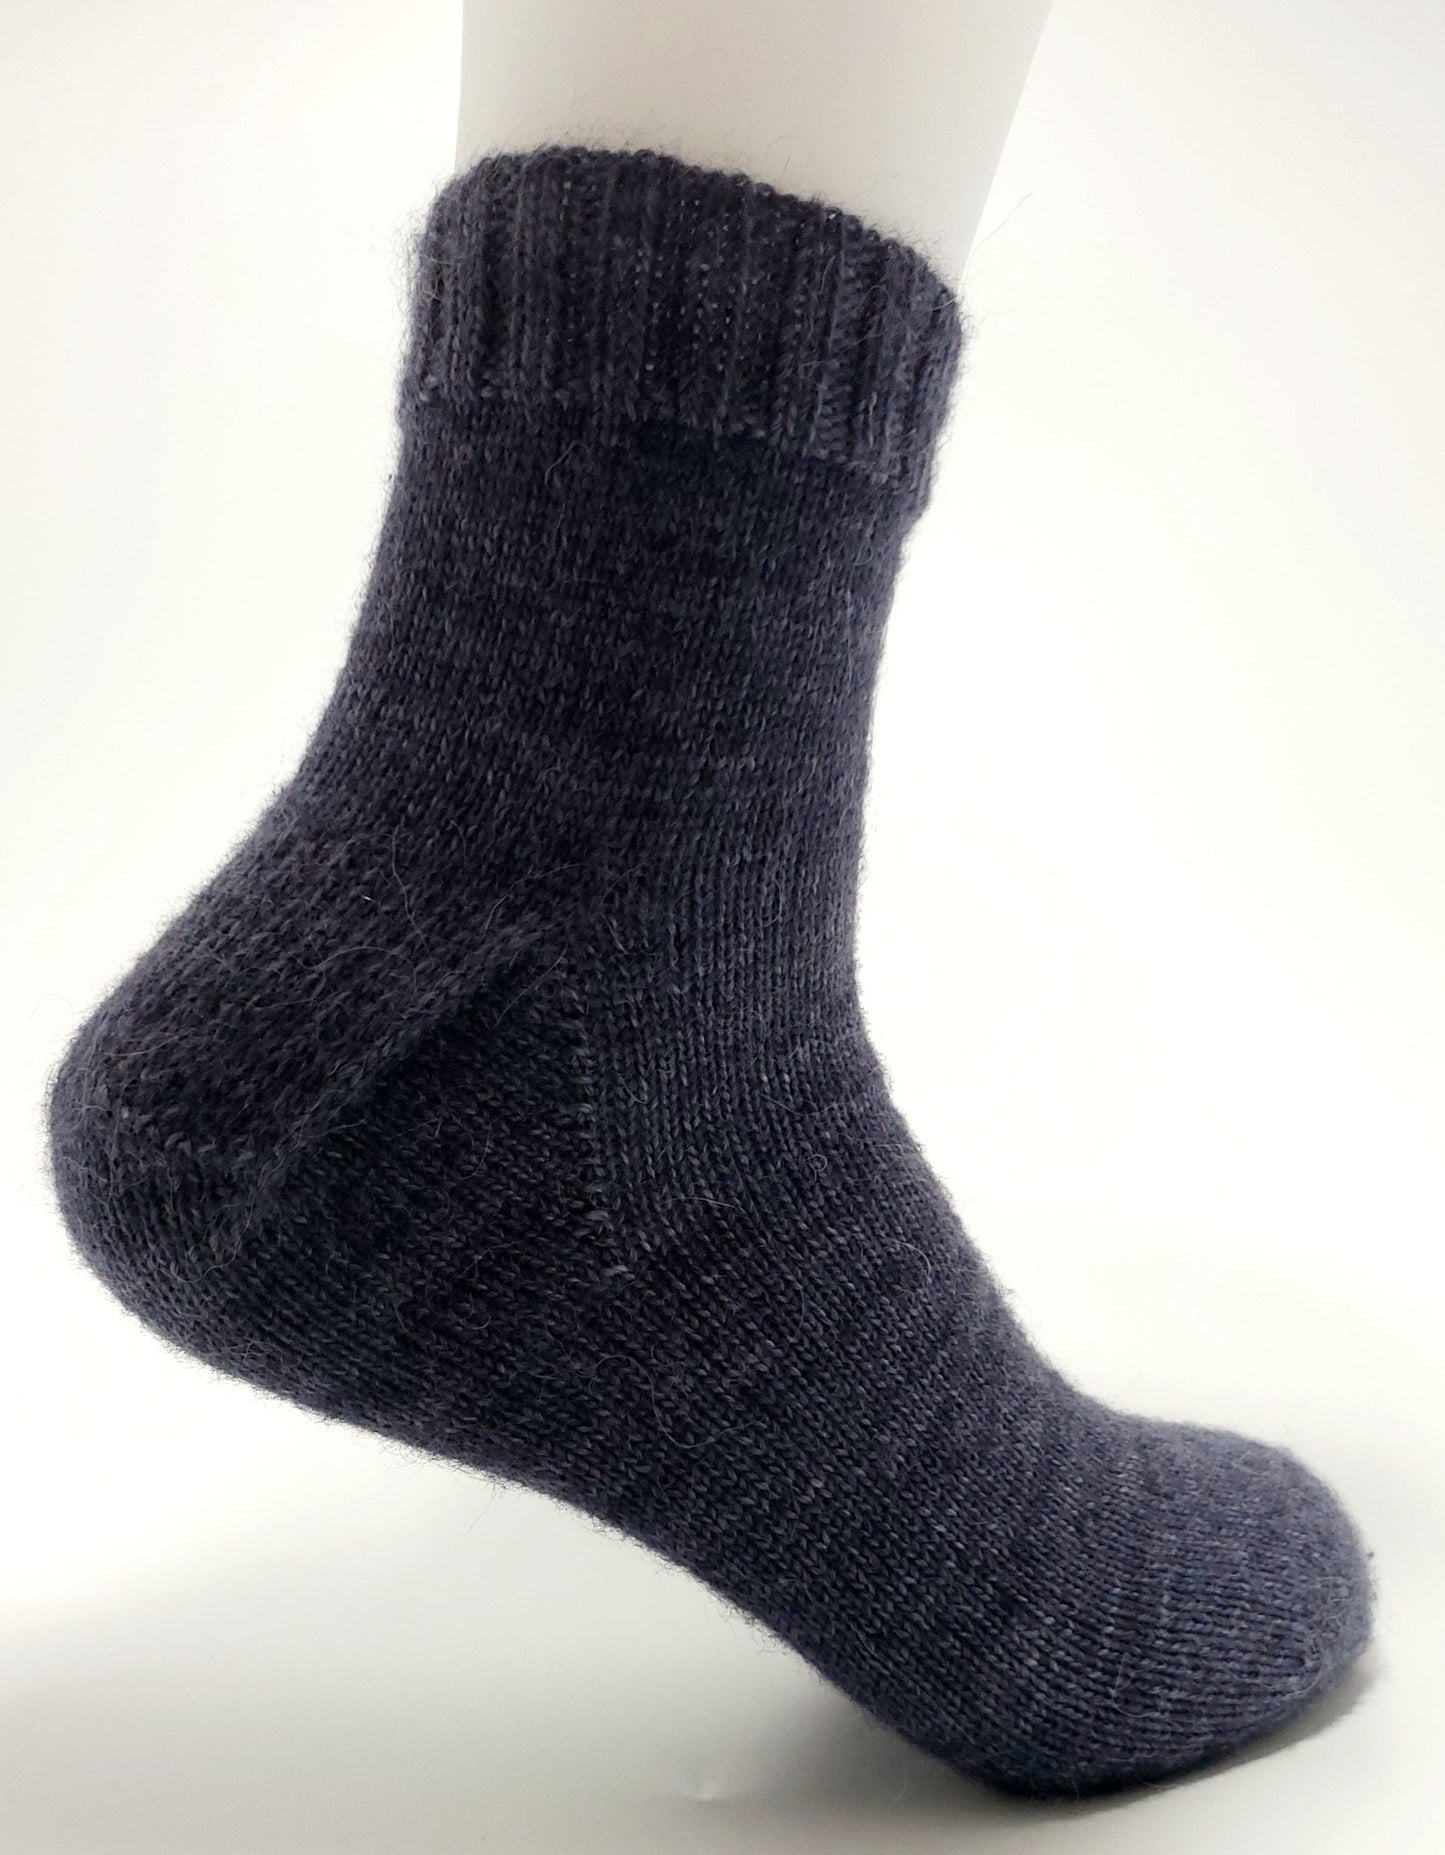 Made to order socks